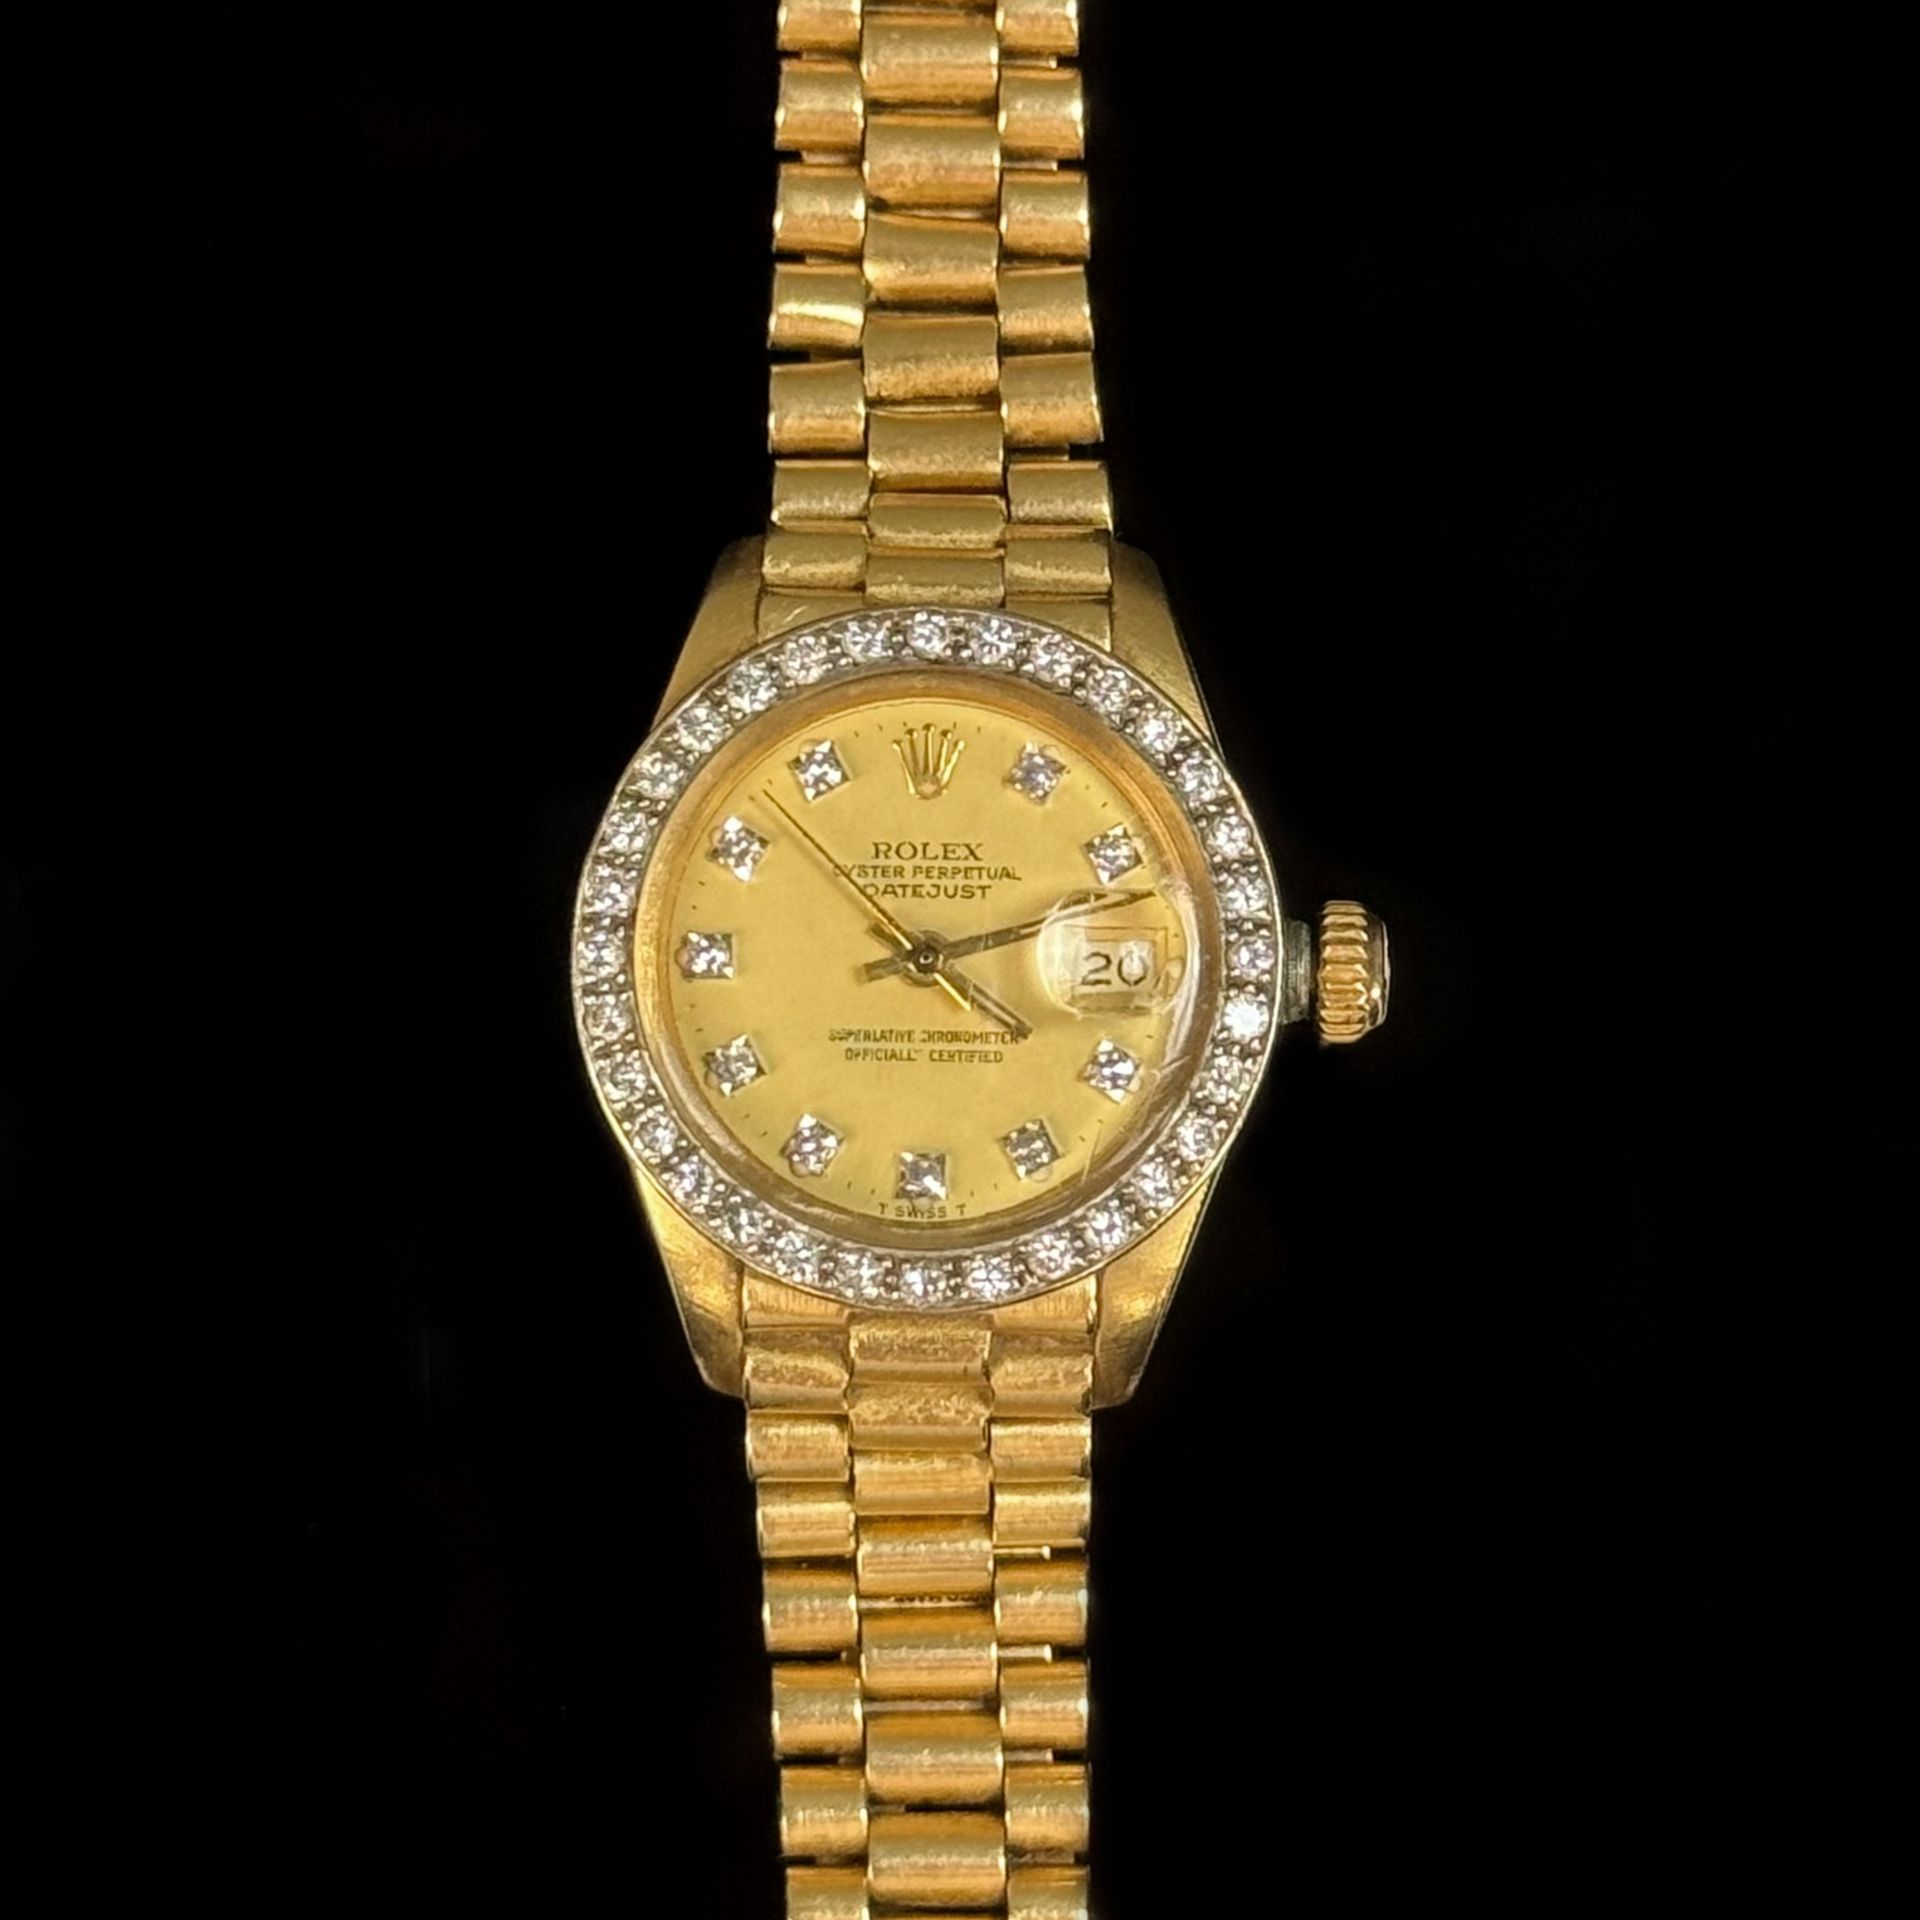 Rolex, Oyster Perpetual Datejust, automatic, starts, 750/18K yellow gold (hallmarked), Ref. 8570, P - Image 2 of 3